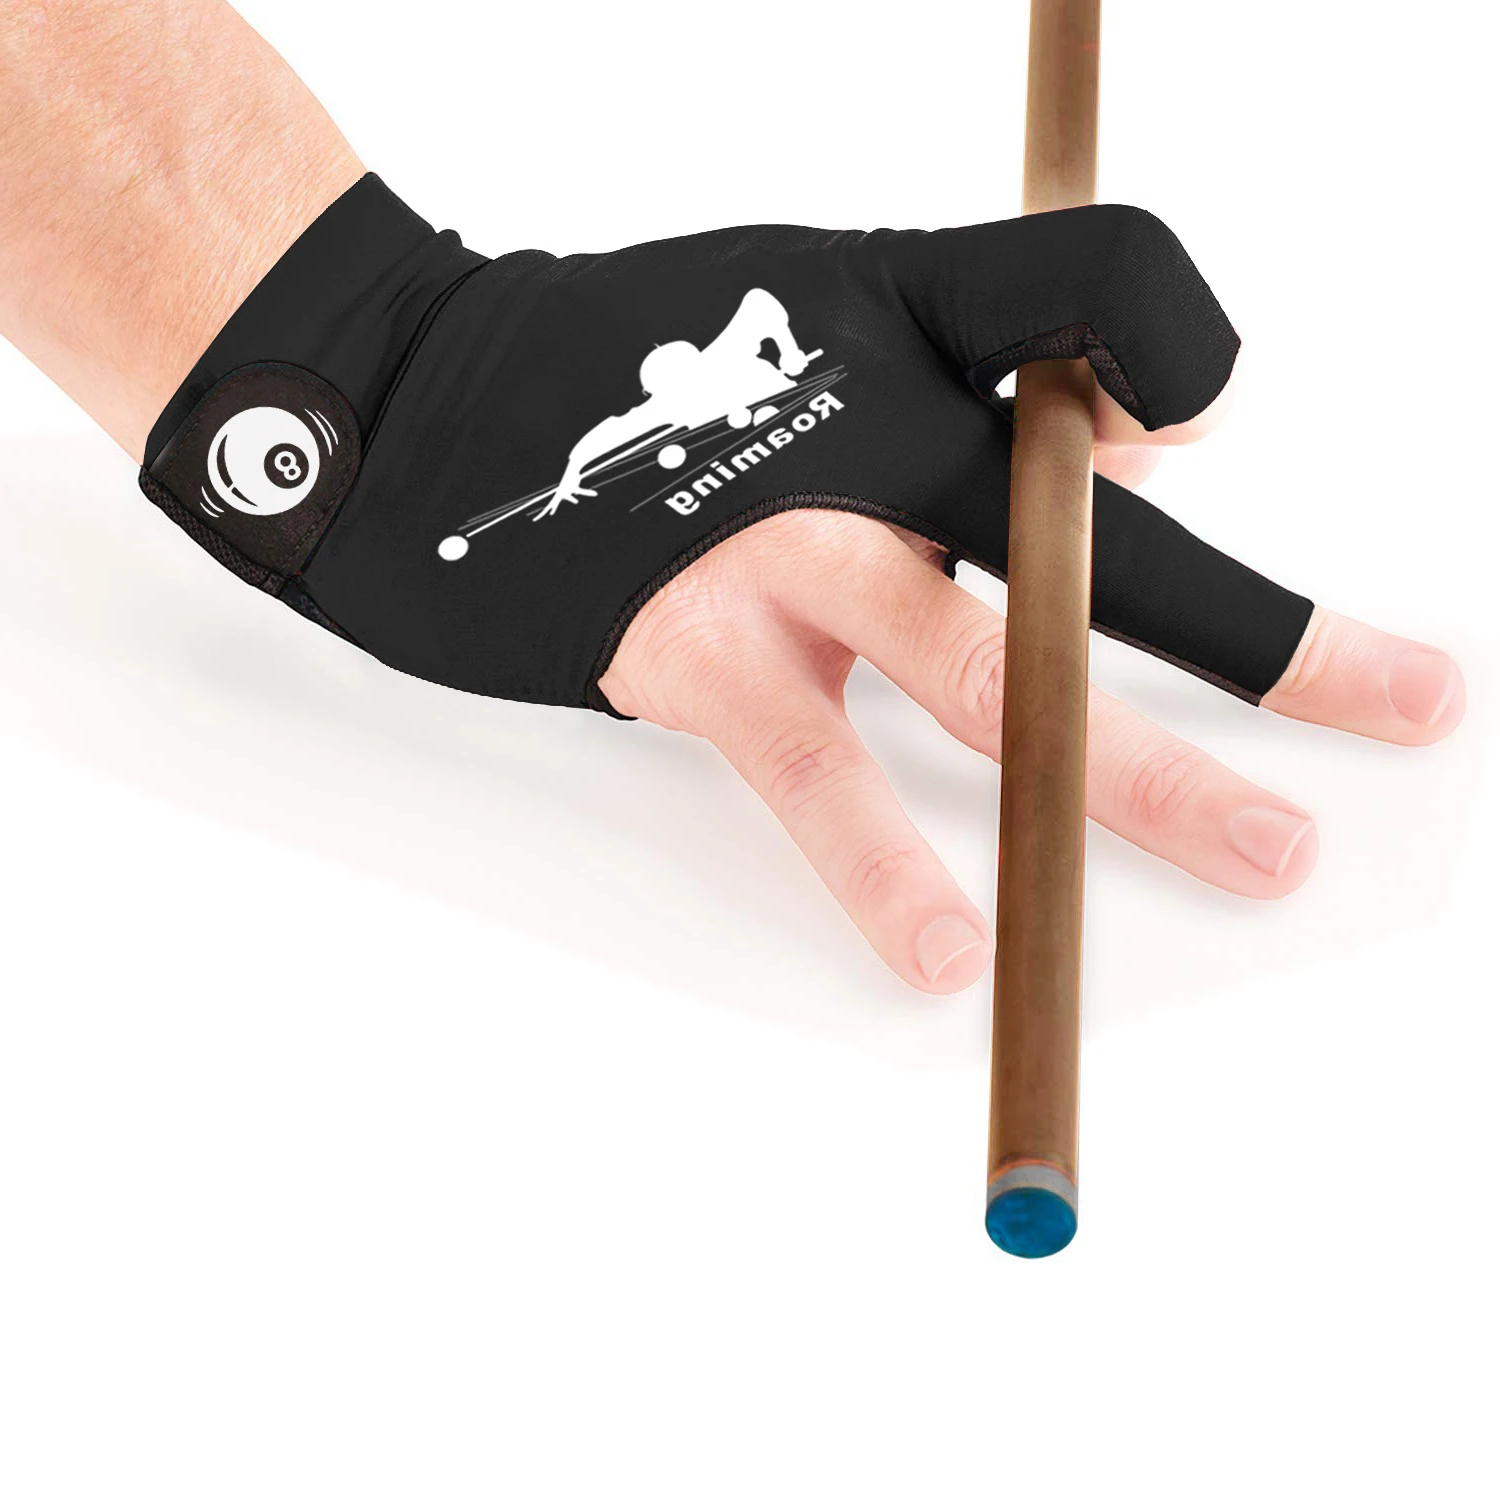 Roaming Billiards Glove Carom Pool Glove Snooker Cue Sport Glove Fit on Left Hand for Men and Women 